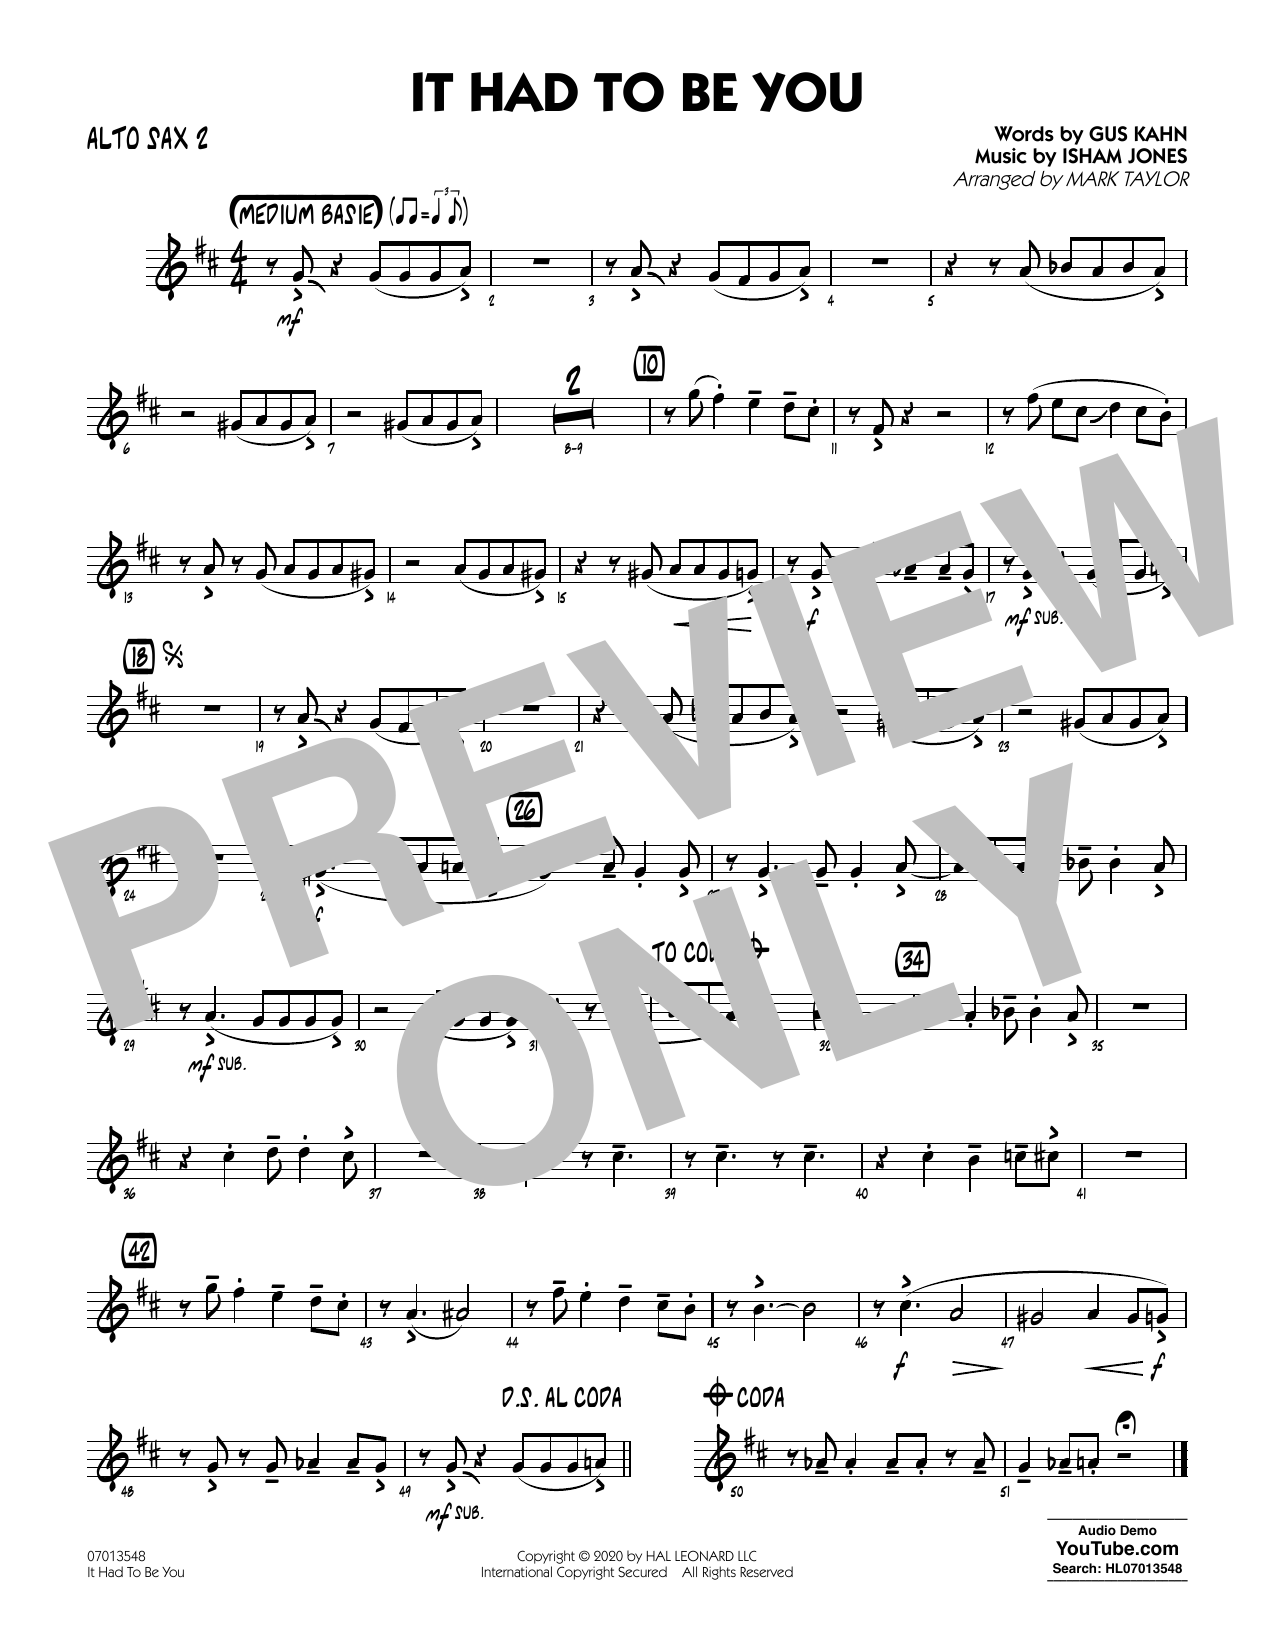 Download Isham Jones and Gus Kahn It Had to Be You (arr. Mark Taylor) - A Sheet Music